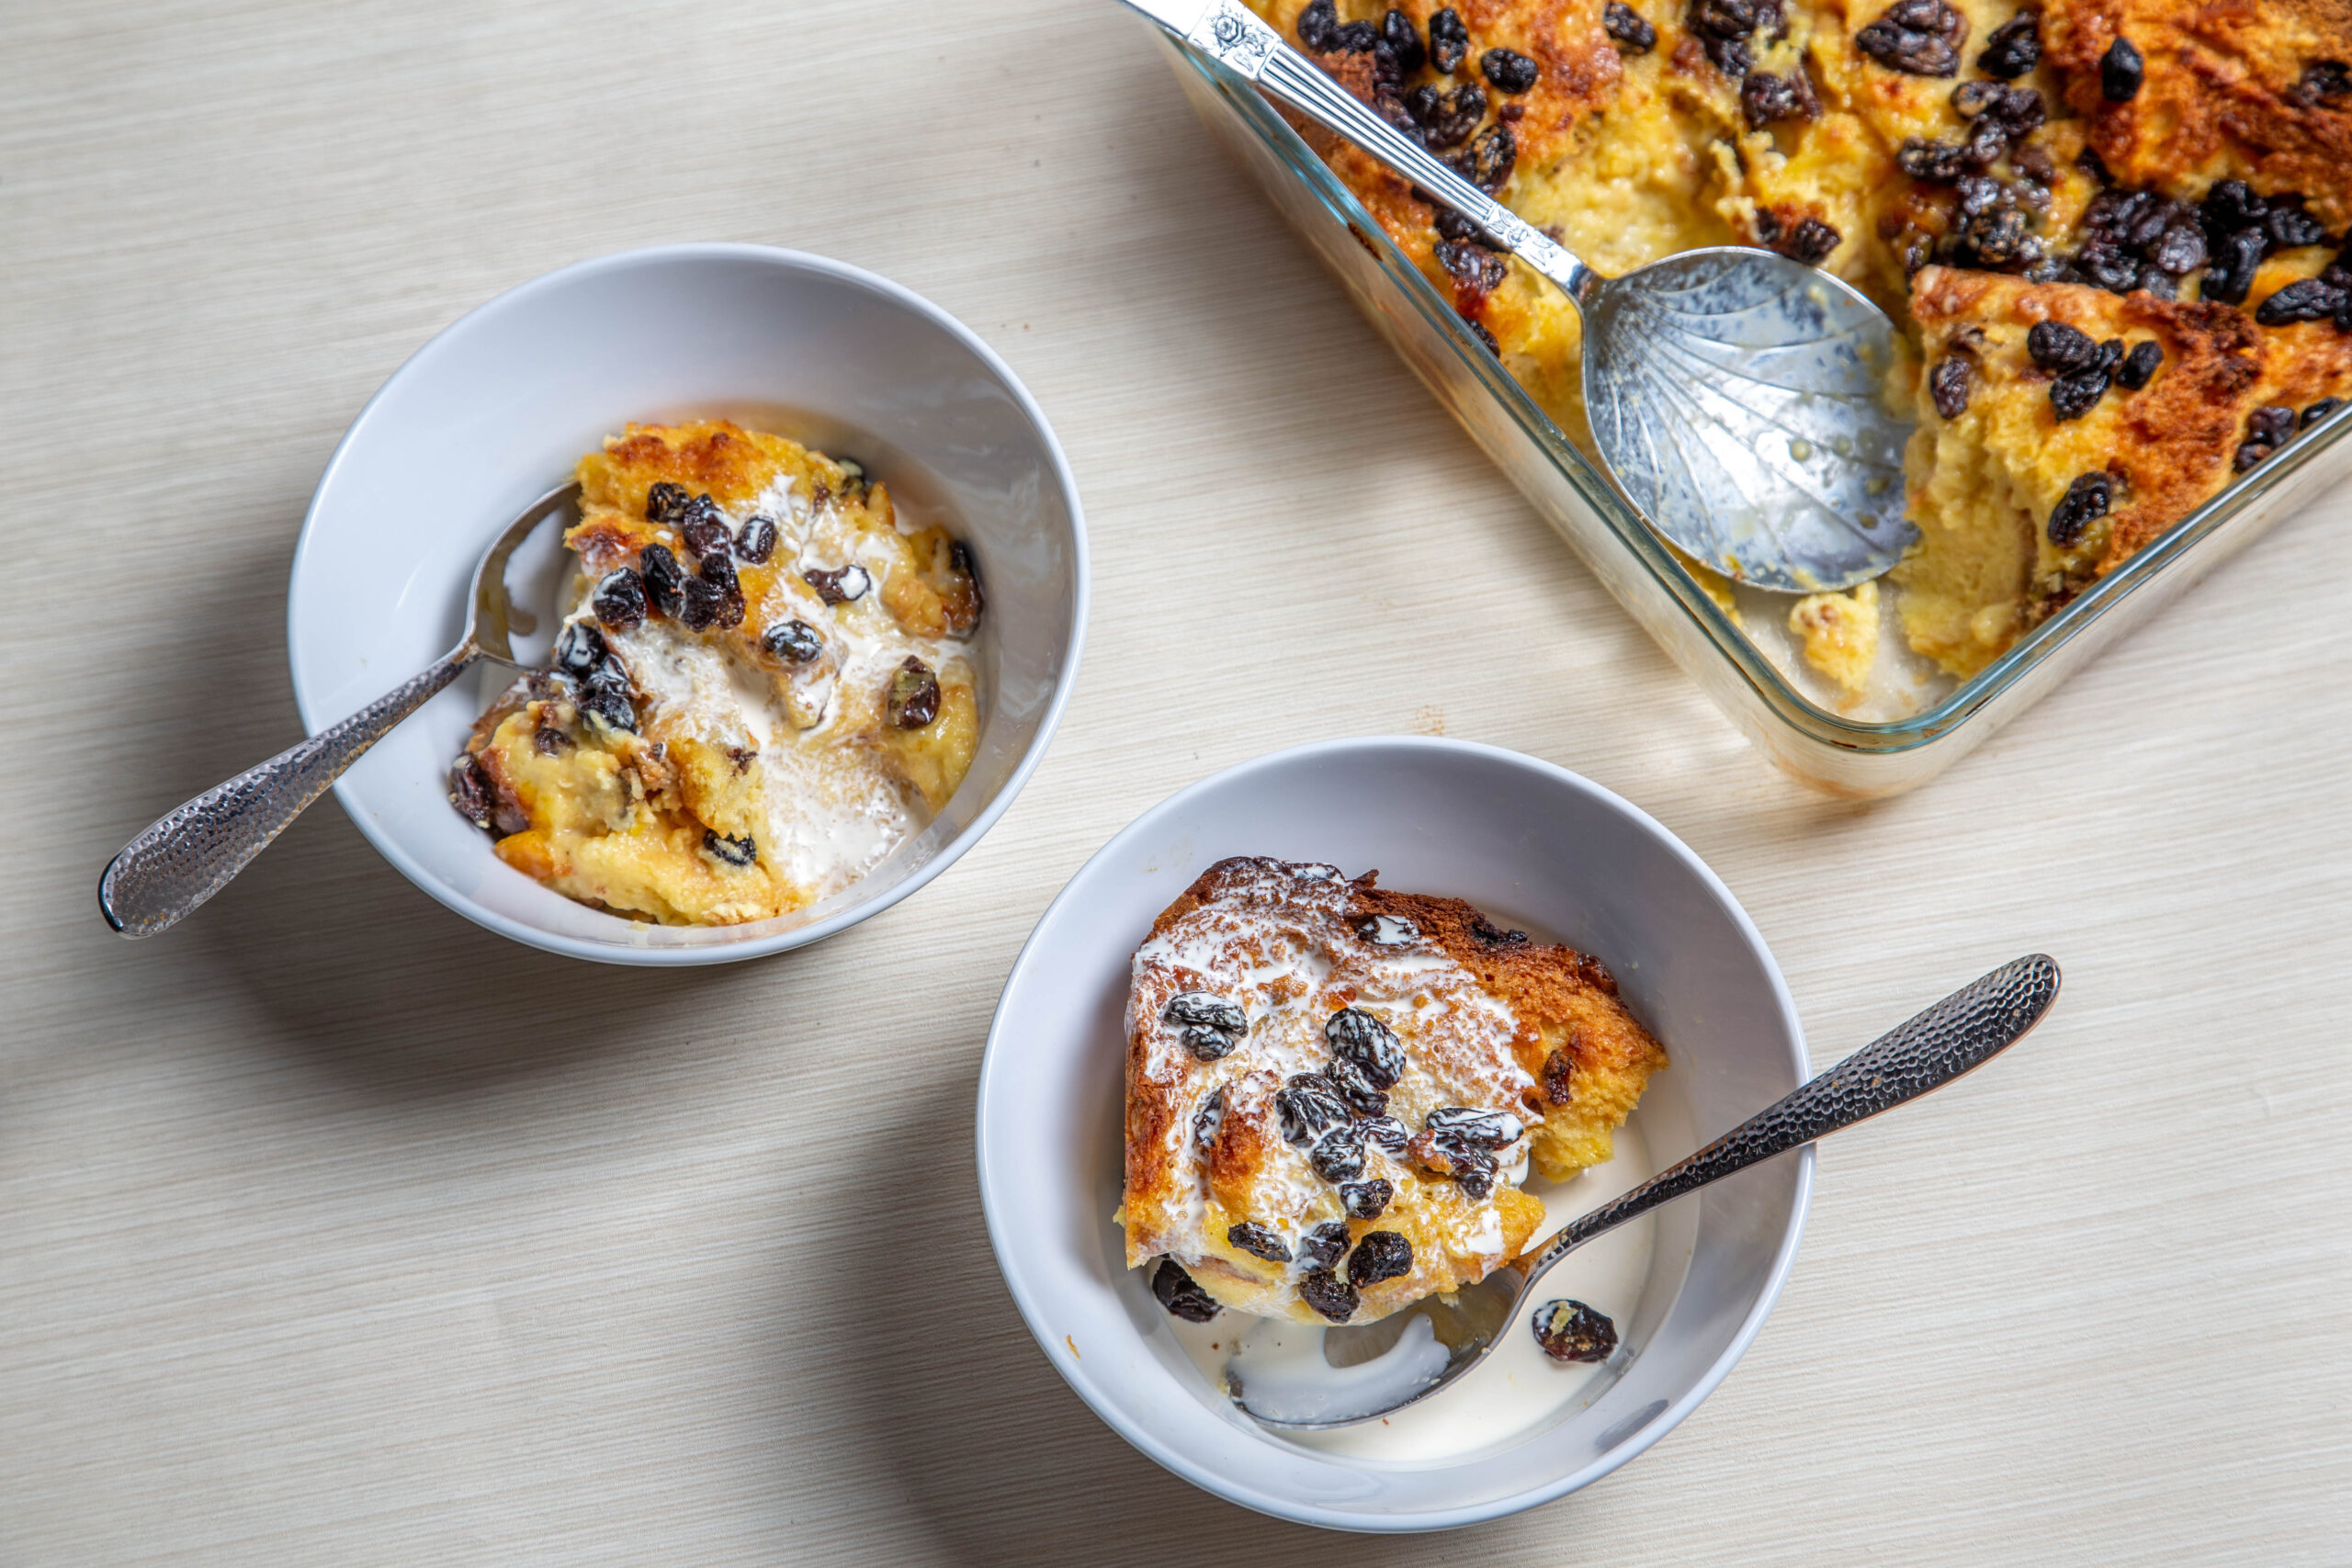 Fortisip Compact Protein Vanilla Recipe: Bread and Butter Pudding by Nutricia